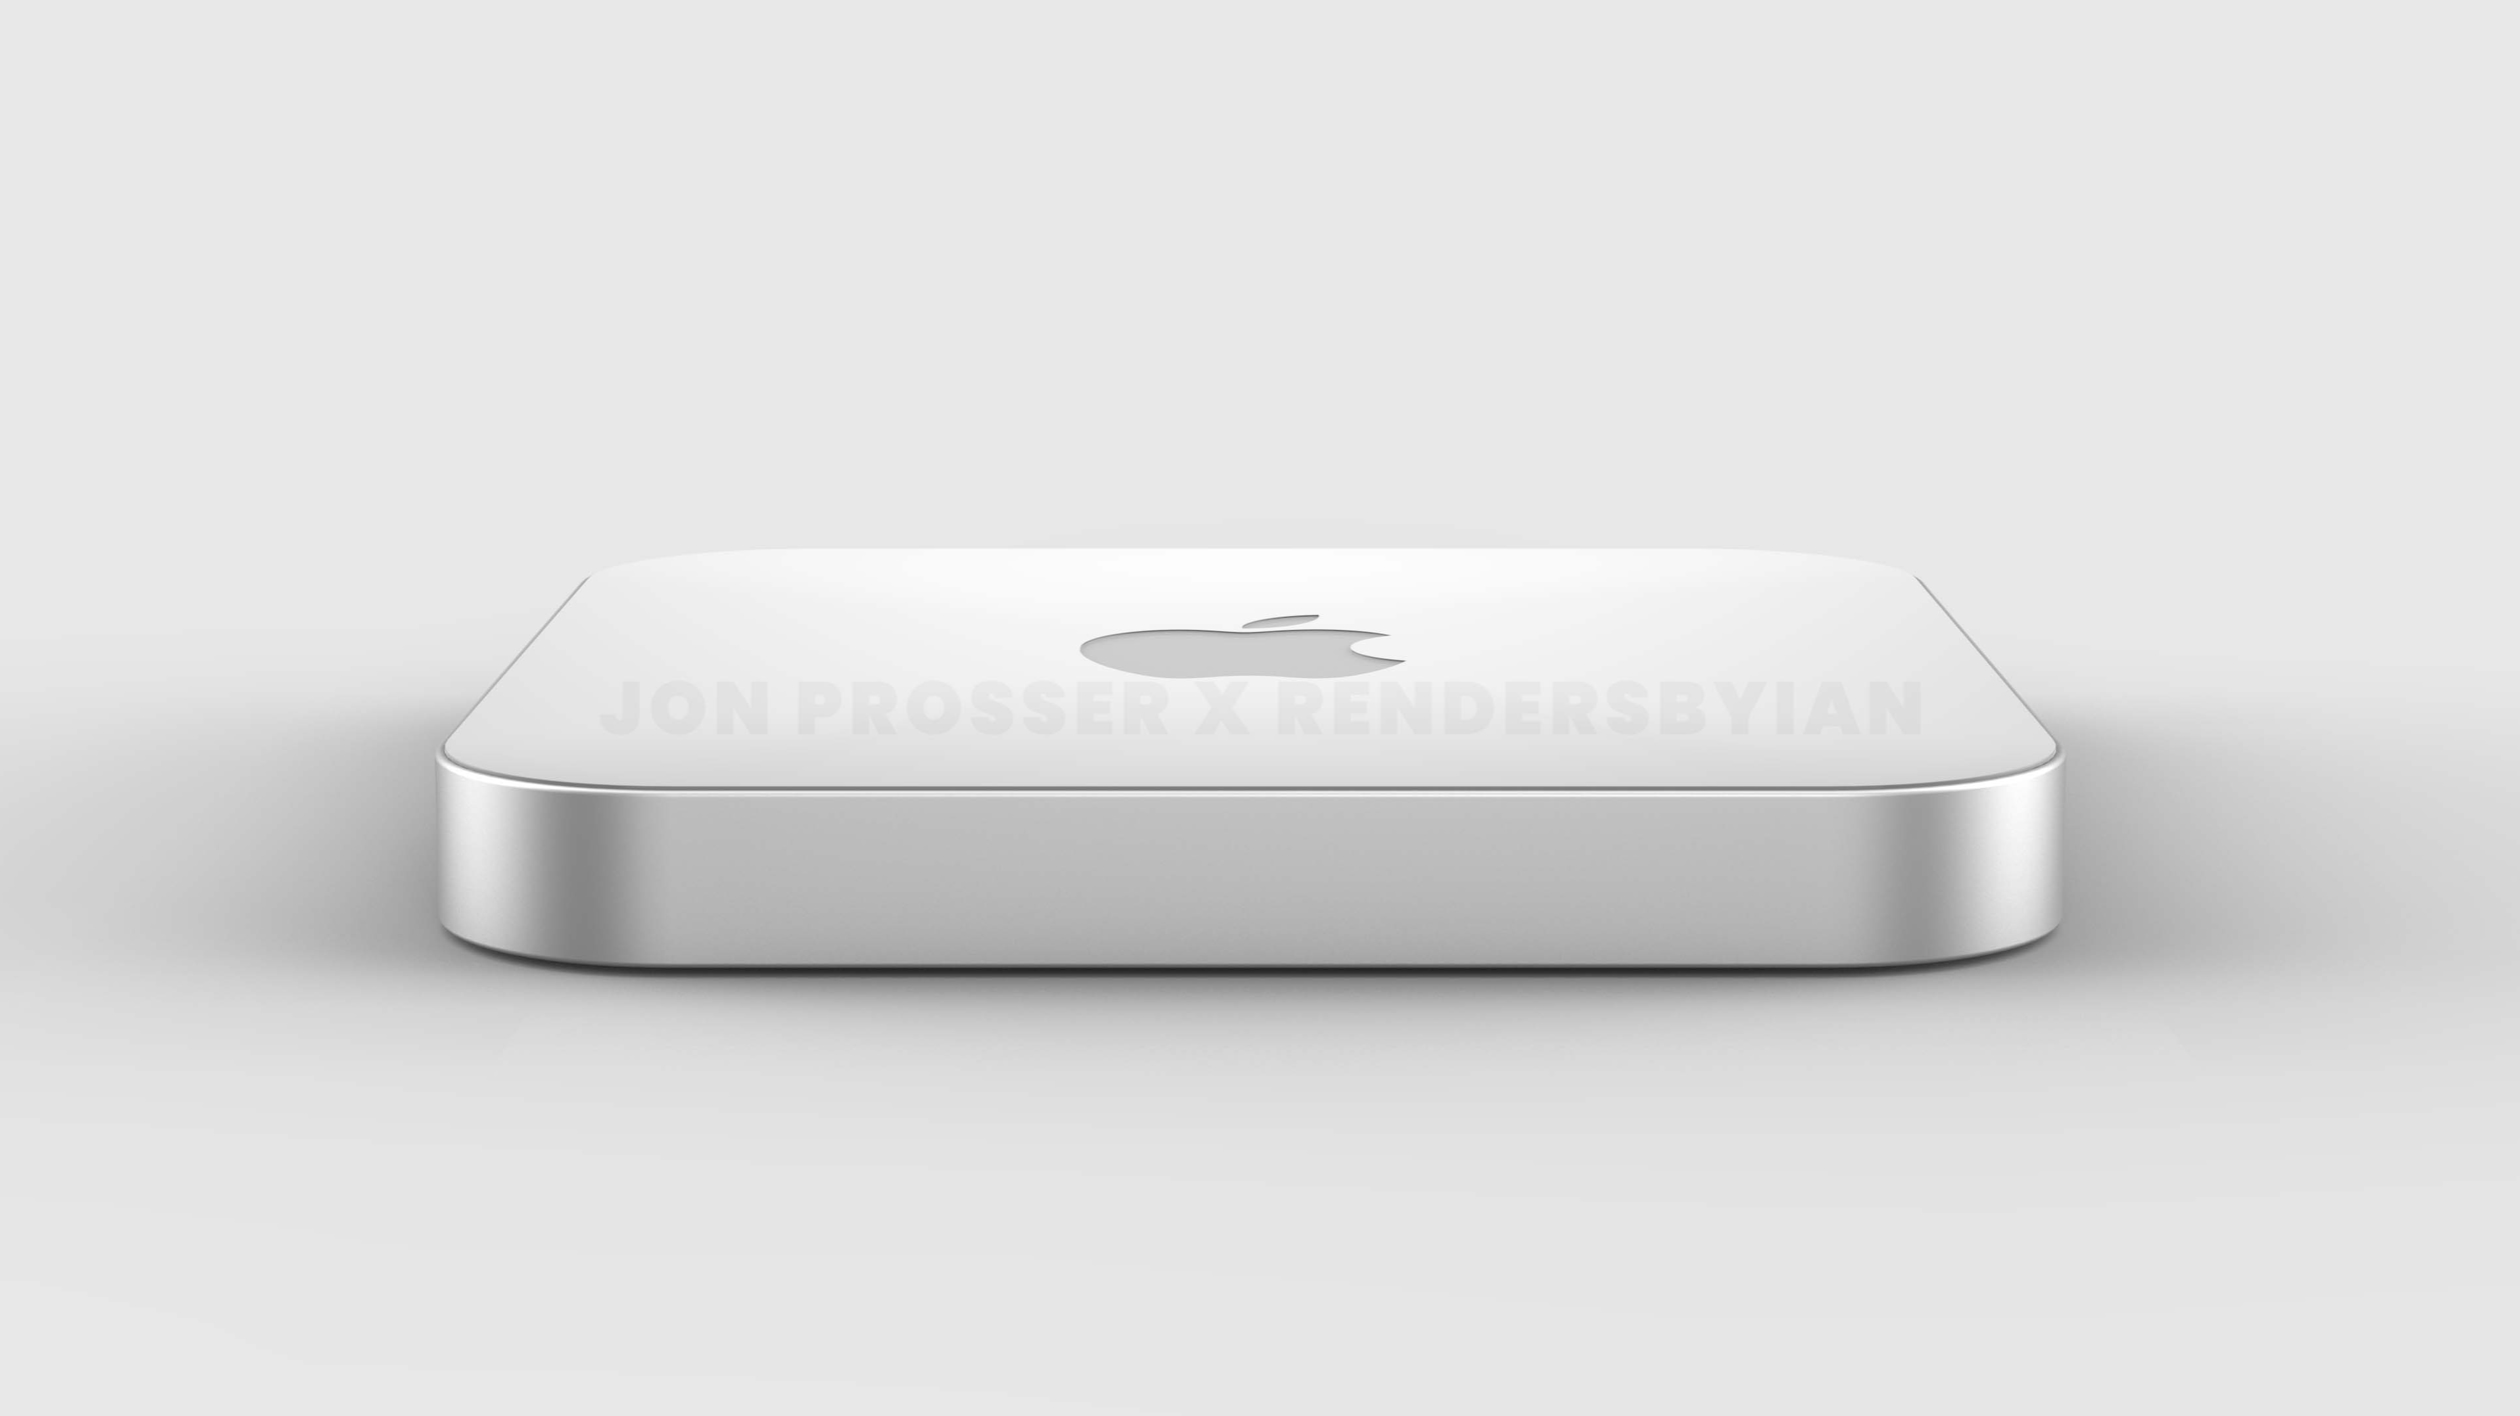 Bloomberg: Apple to release updated Mac mini with M1X chip in coming months